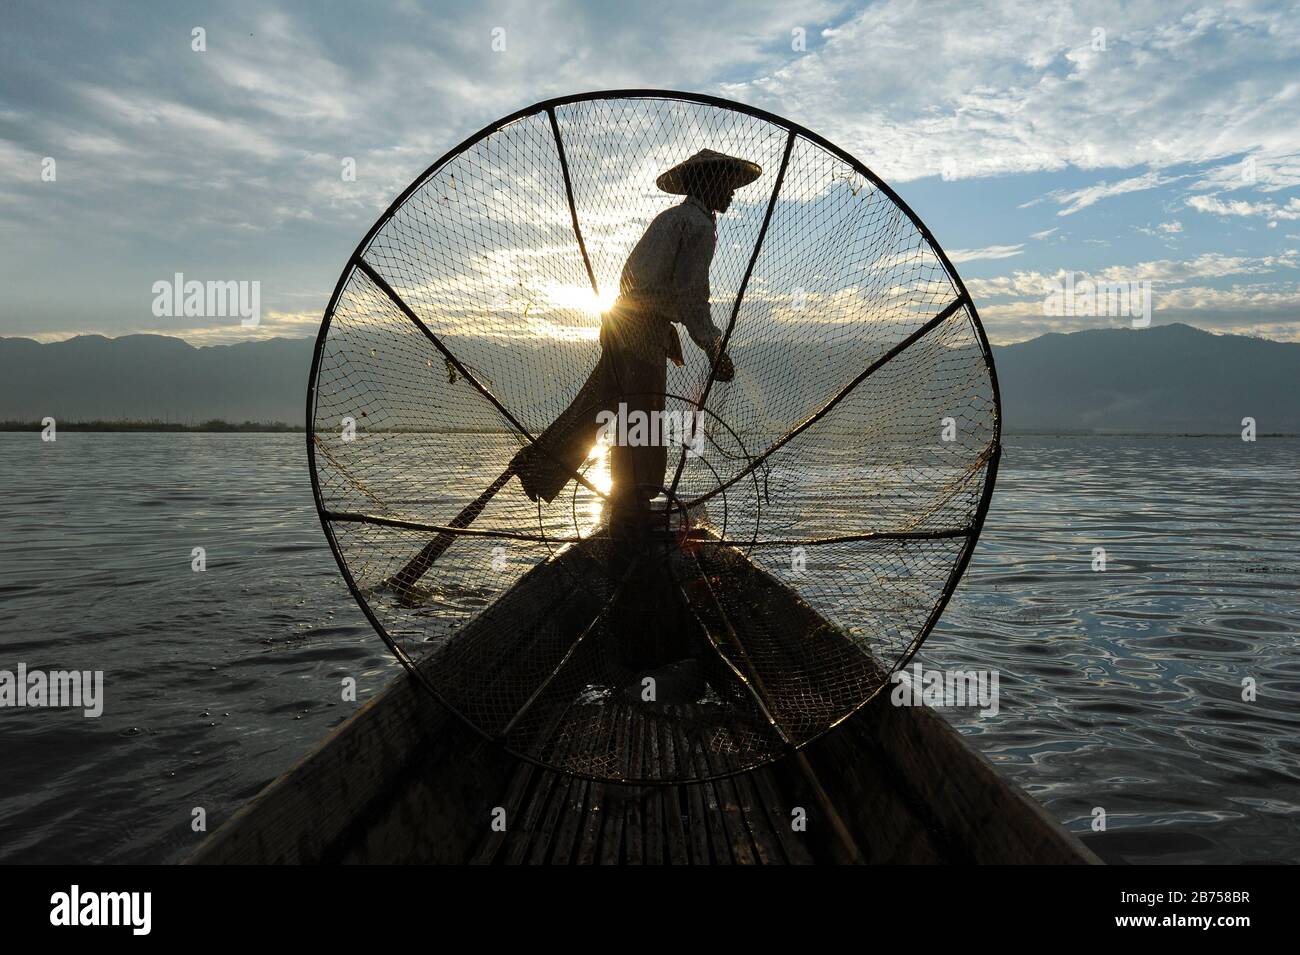 05.03.2014, Nyaung Shwe, Shan State, Myanmar, Asia - A one-legged rower paddles early in the morning along the northern shore of Lake Inle. The lake is located in Shan State in the centre of Myanmar, on the shores of which the Inthas live, who feed themselves mainly through fishing and agriculture. [automated translation] Stock Photo